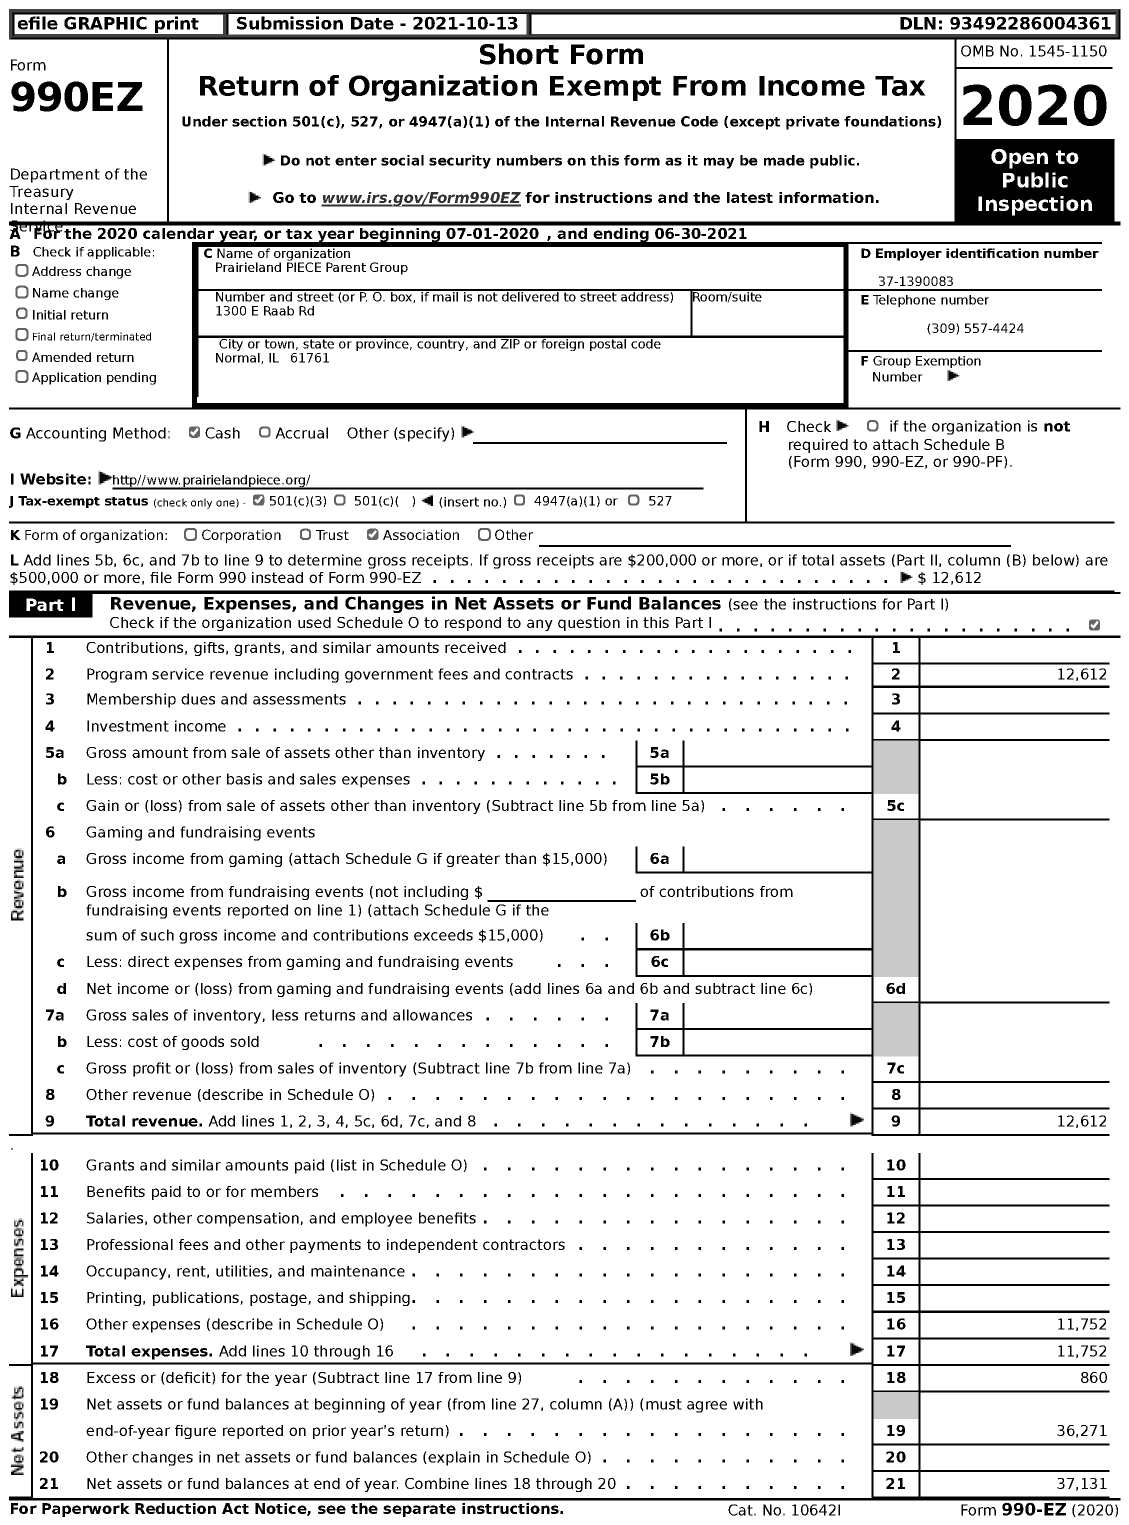 Image of first page of 2020 Form 990EZ for Prairieland PIECE Parent Group